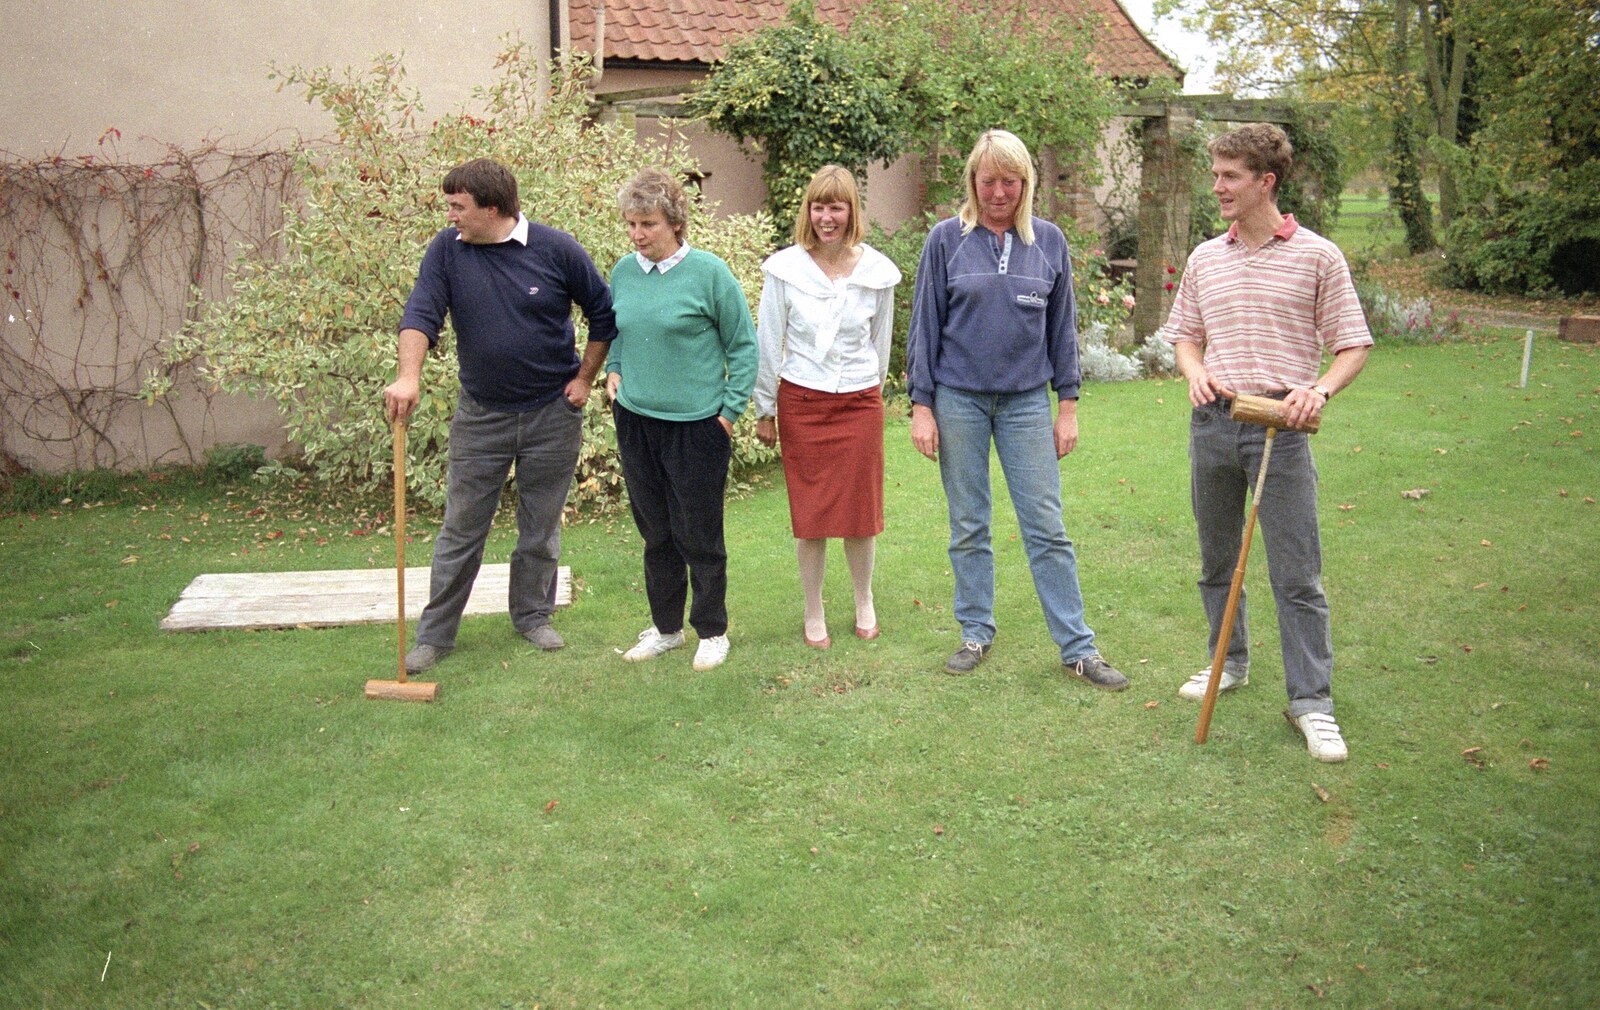 The gang contemplate their missing balls from Croquet, and Printec at the Railway Tavern, Stuston and Diss - 30th September 1990